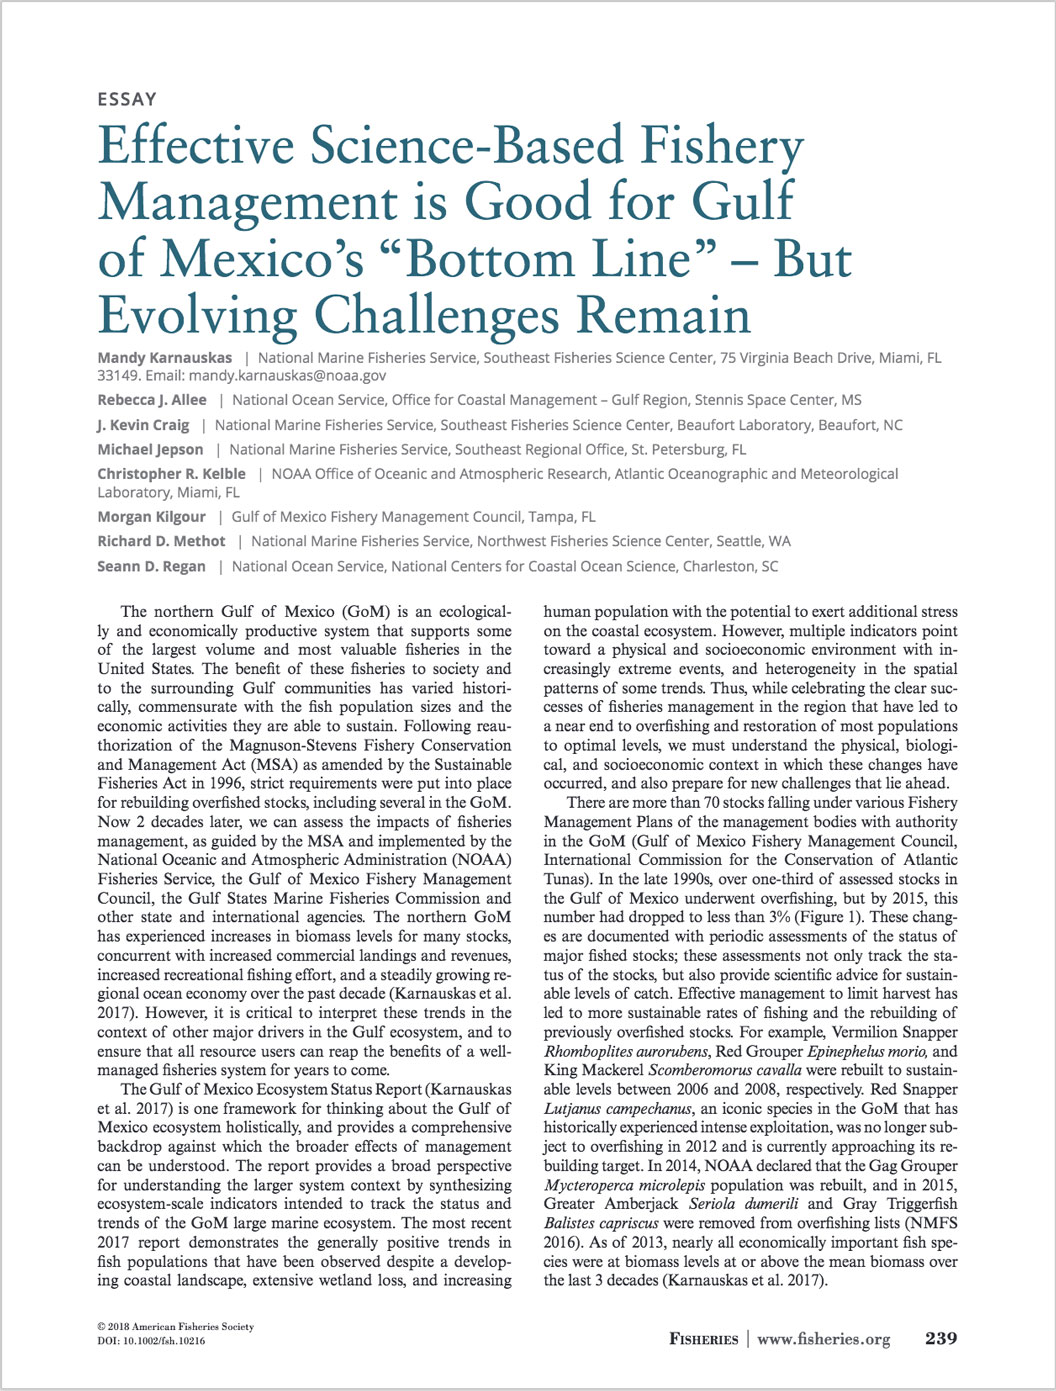 Essay: Effective Science- Based Fishery Management is Good for Gulf of Mexico’s “Bottom Line” – But Evolving Challenges Remain